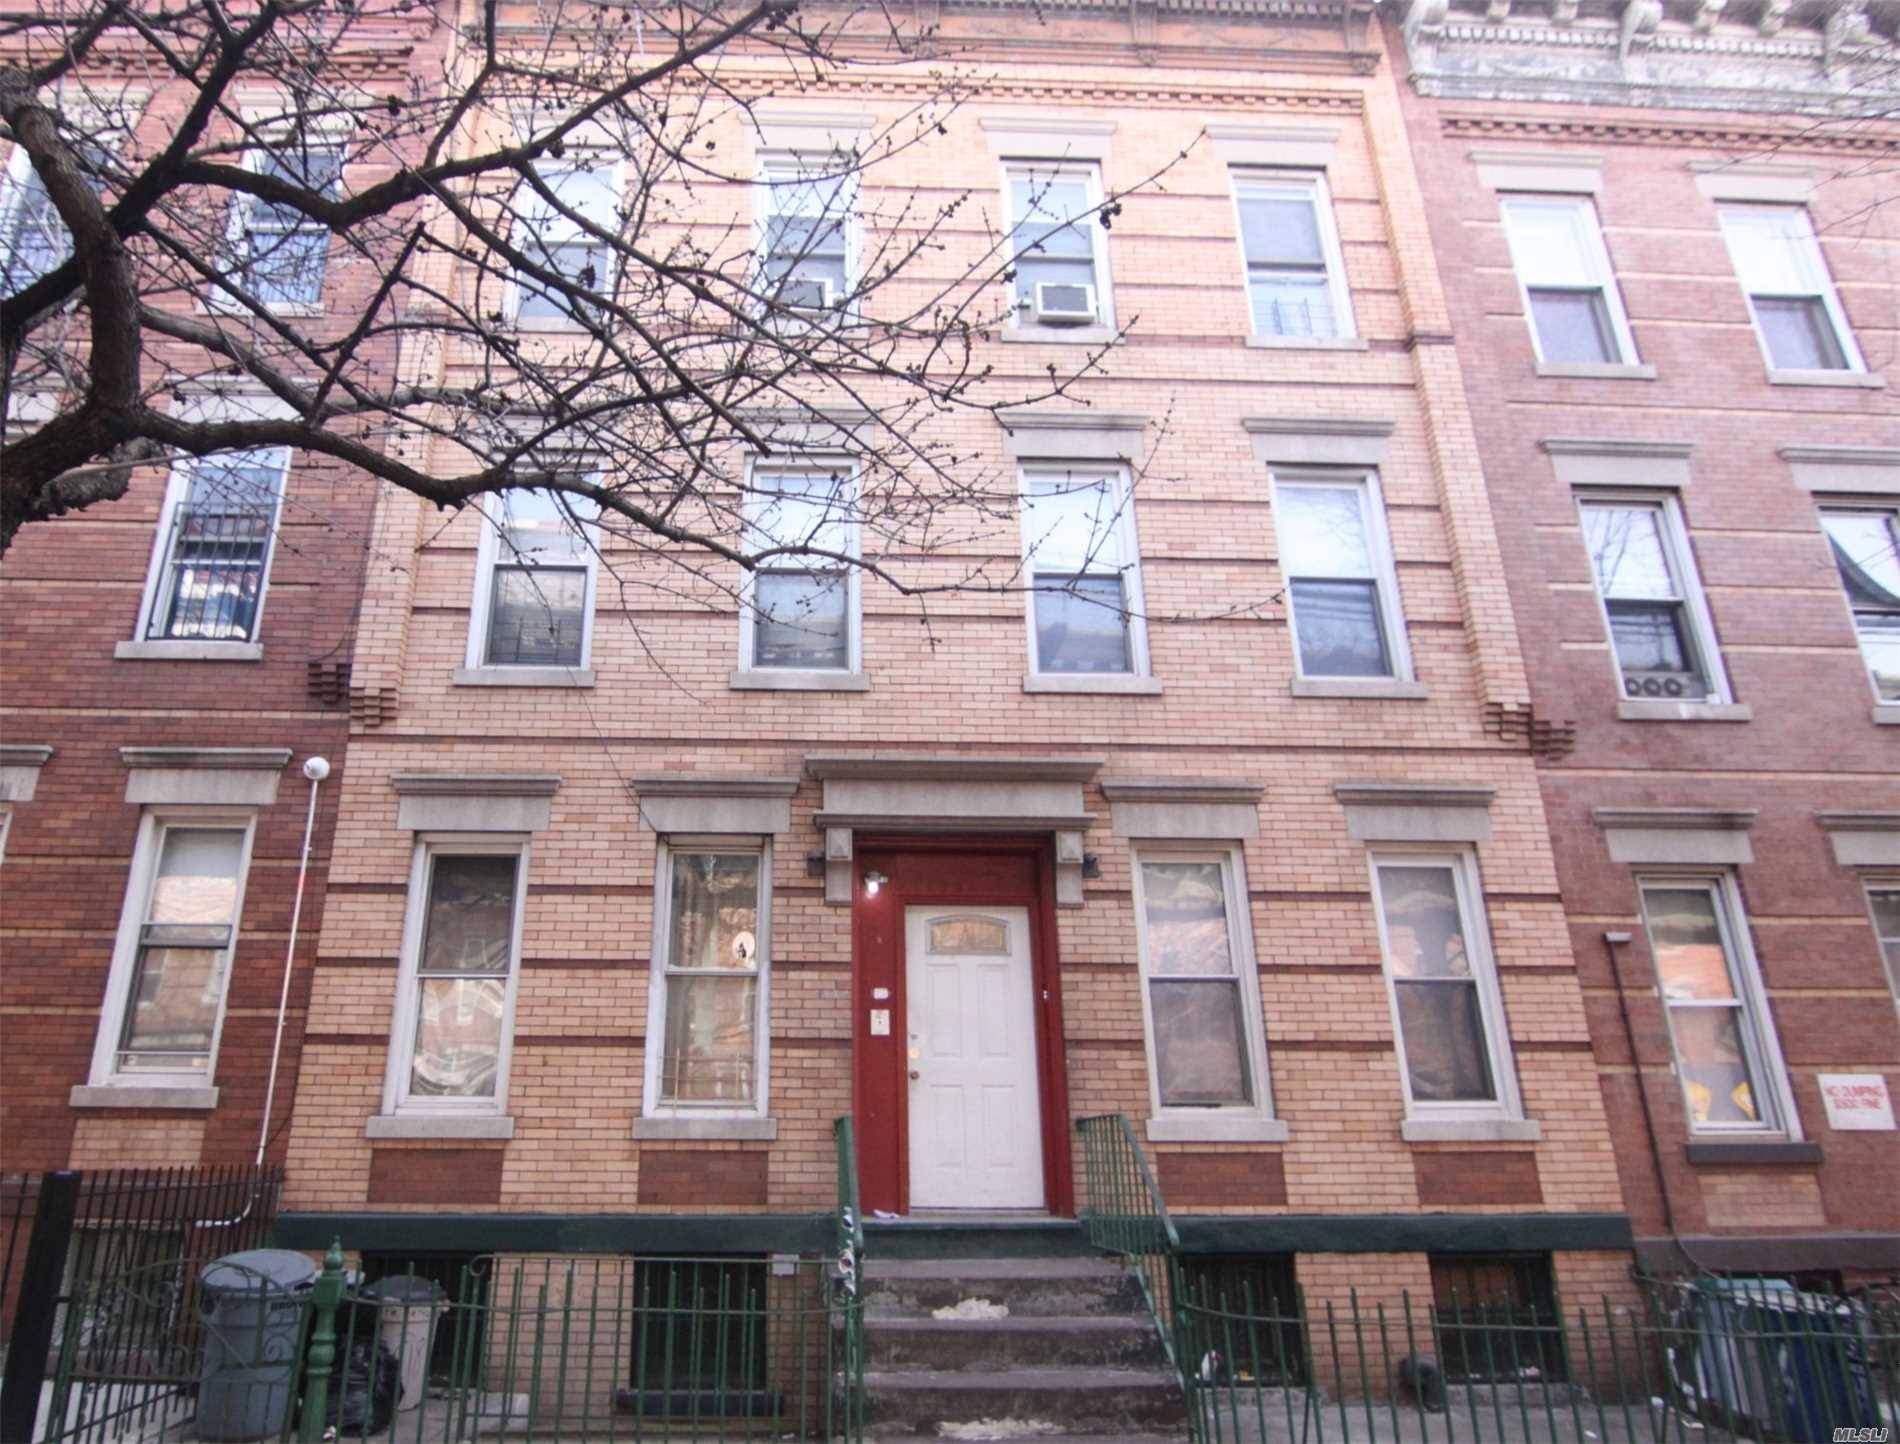 Six Family Townhouse With Two Renovated Apartments And One Vacant Apartment, A Lot Of Potential.